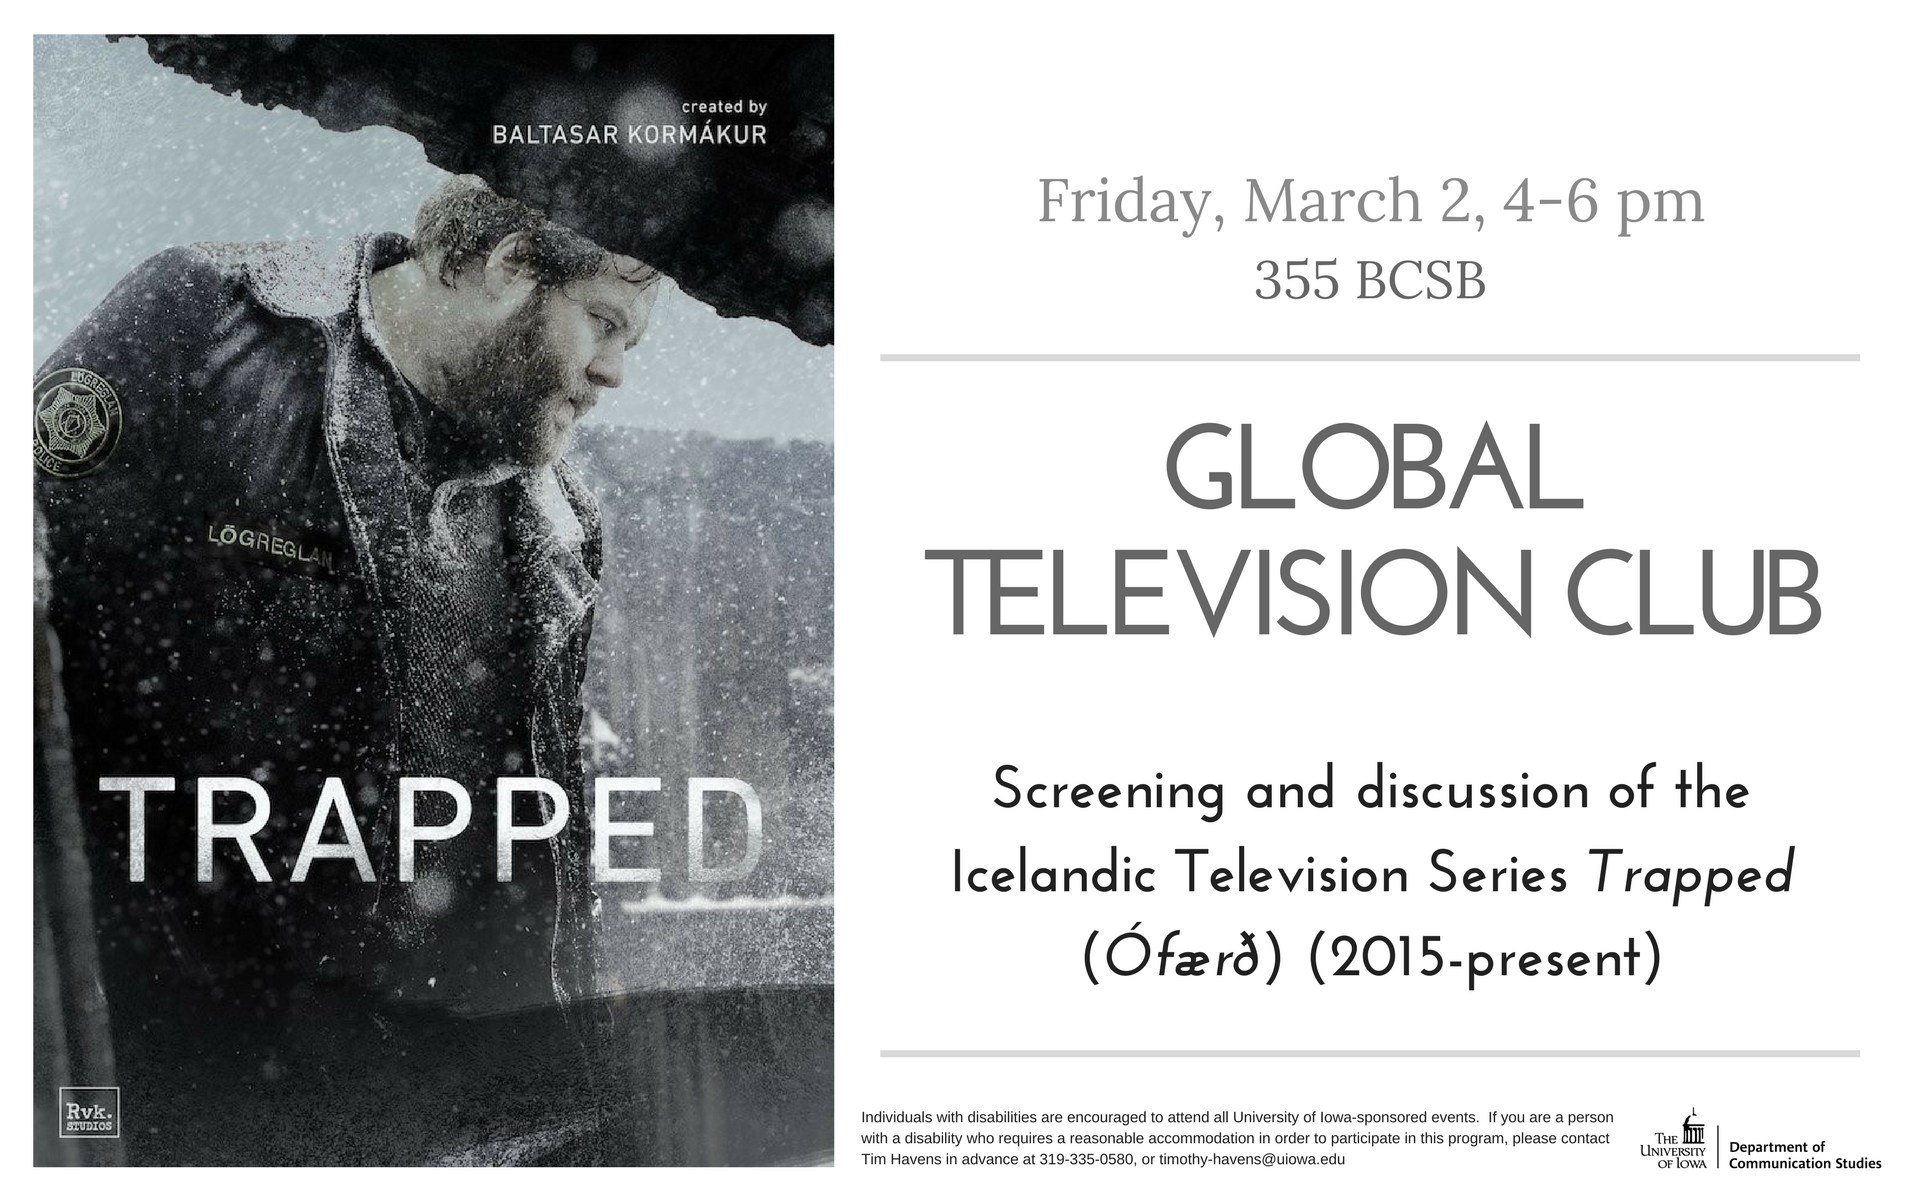 Friday, March 2, 4-6pm 335 BCSB, Global Television Club Screening and discussion of the Icelandic Television Series Trapped (Ófærð) (2015-present) Individuals with disabilities are encouraged to attend all University of Iowa-sponsored events.  If you are a person with a disability who requires a reasonable accommodation in order to participate in this program, please contact Tim Havens in advance at 319-335-0580, or timothy-havens@uiowa.edu